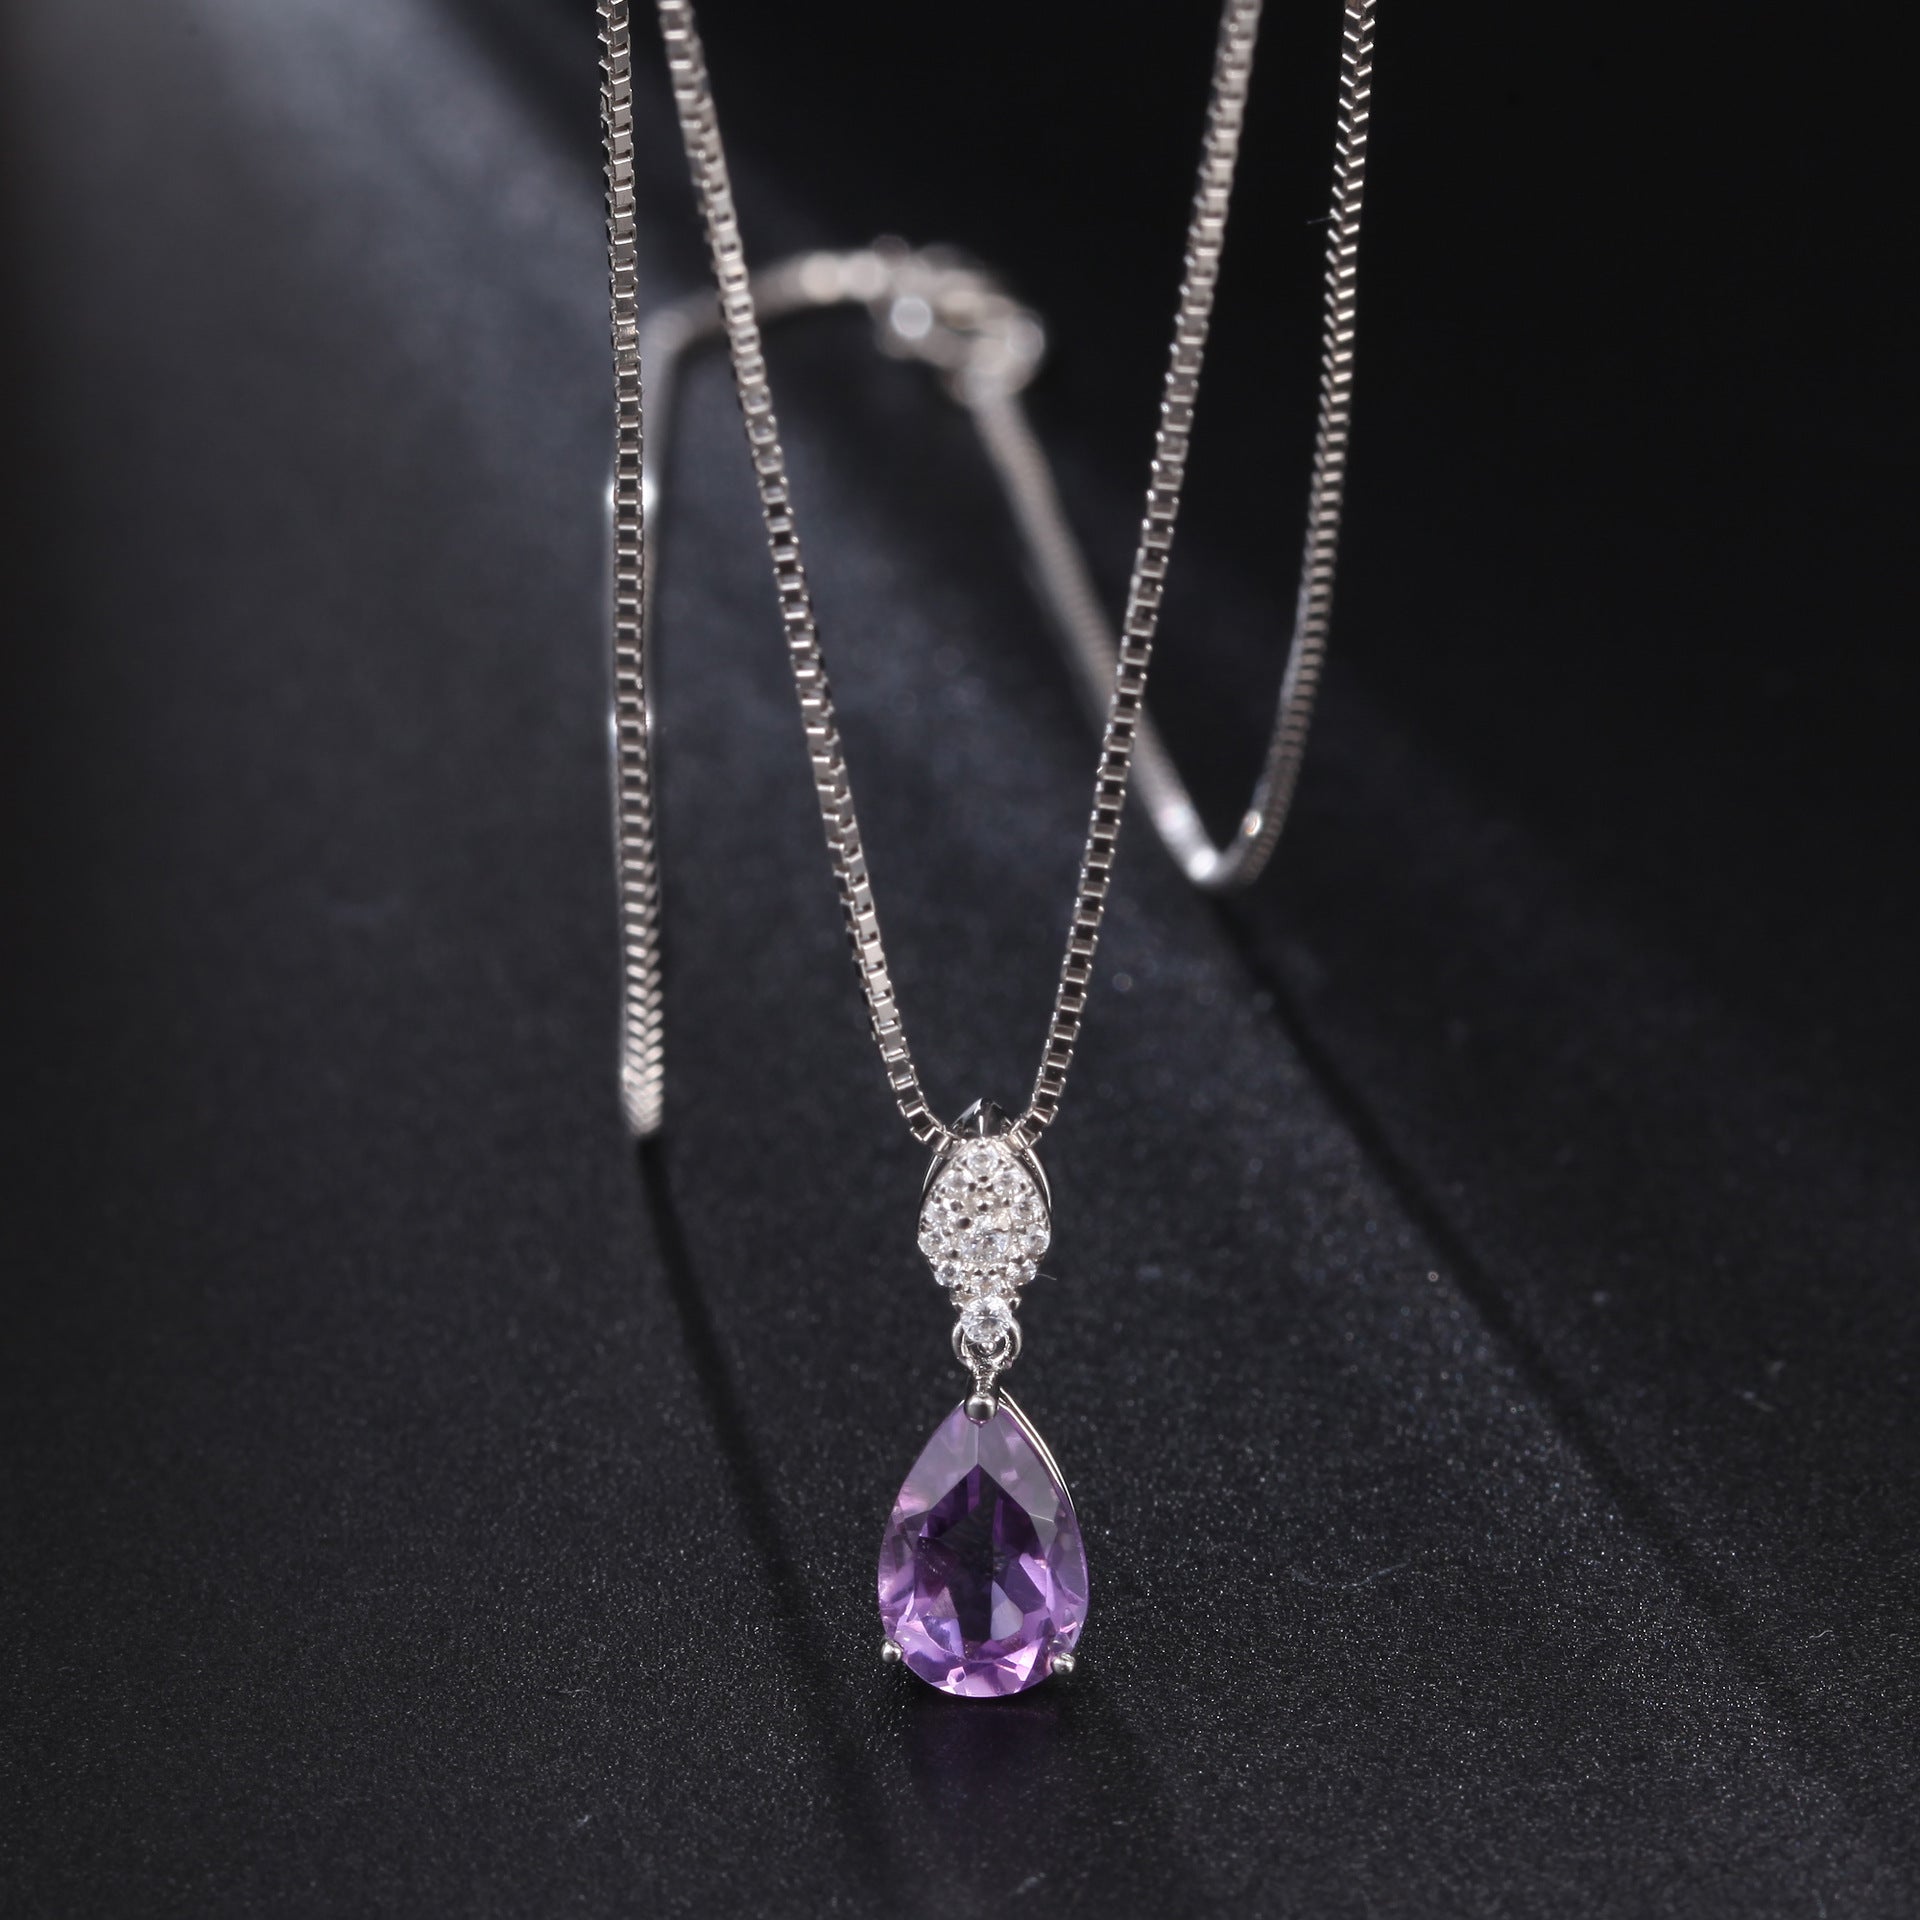 Amethyst Crystal Necklace - HERS